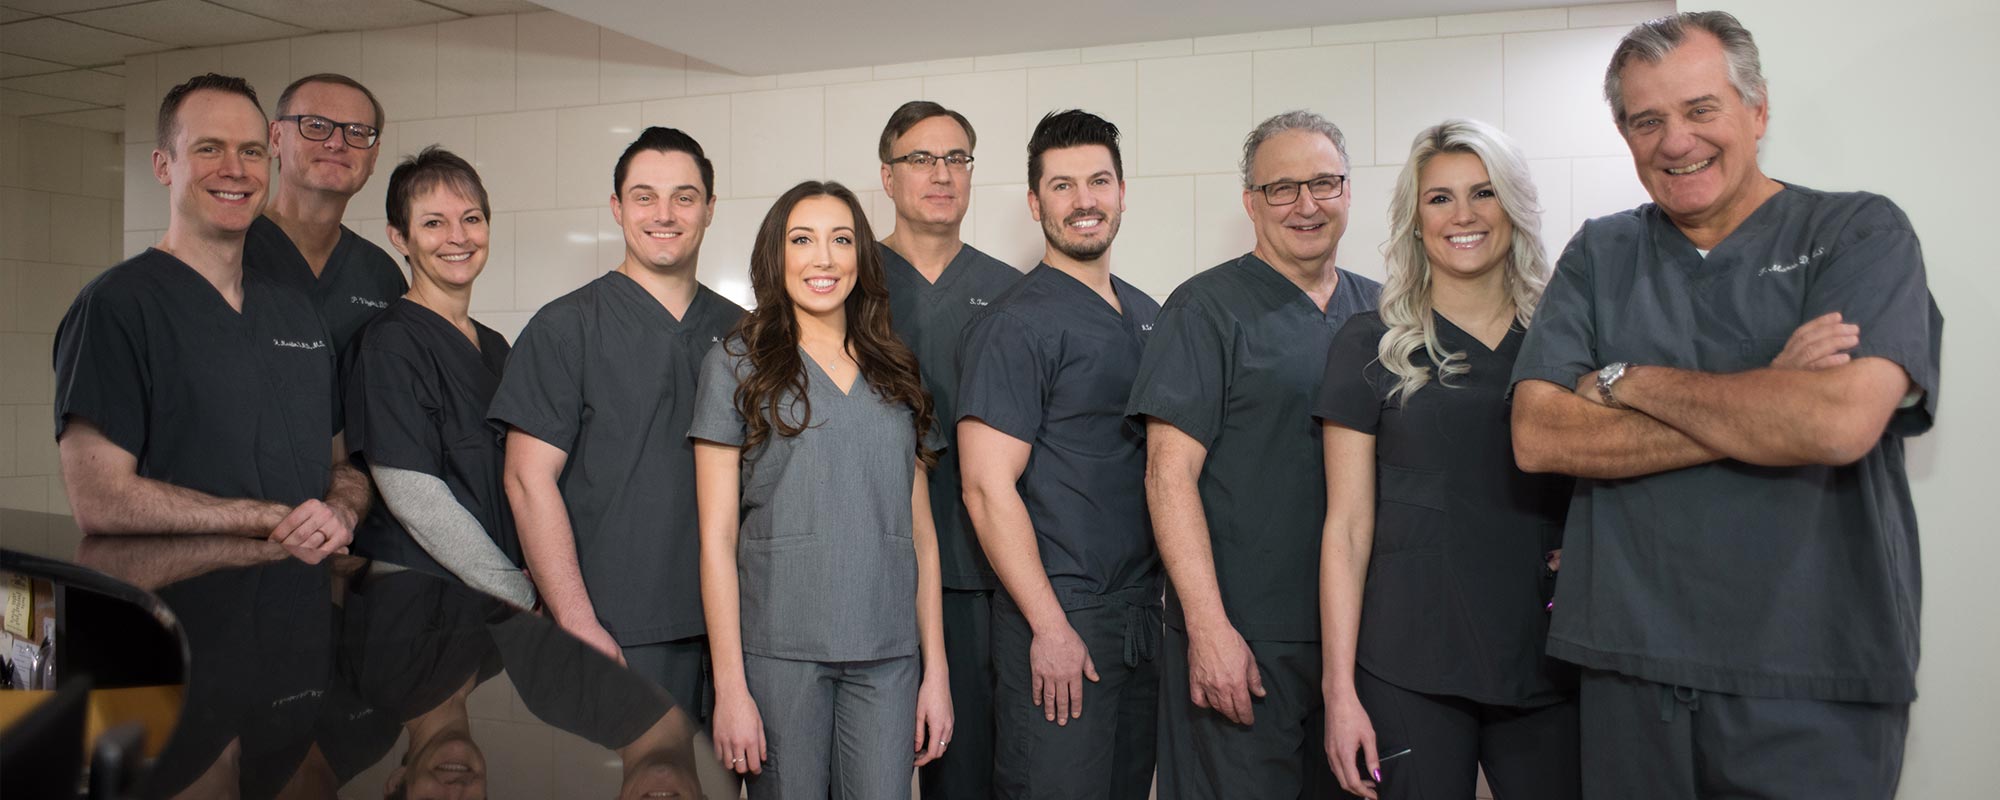 Dentists in Spring, TX - Cosmetic Dentistry (Emergency Dentists)